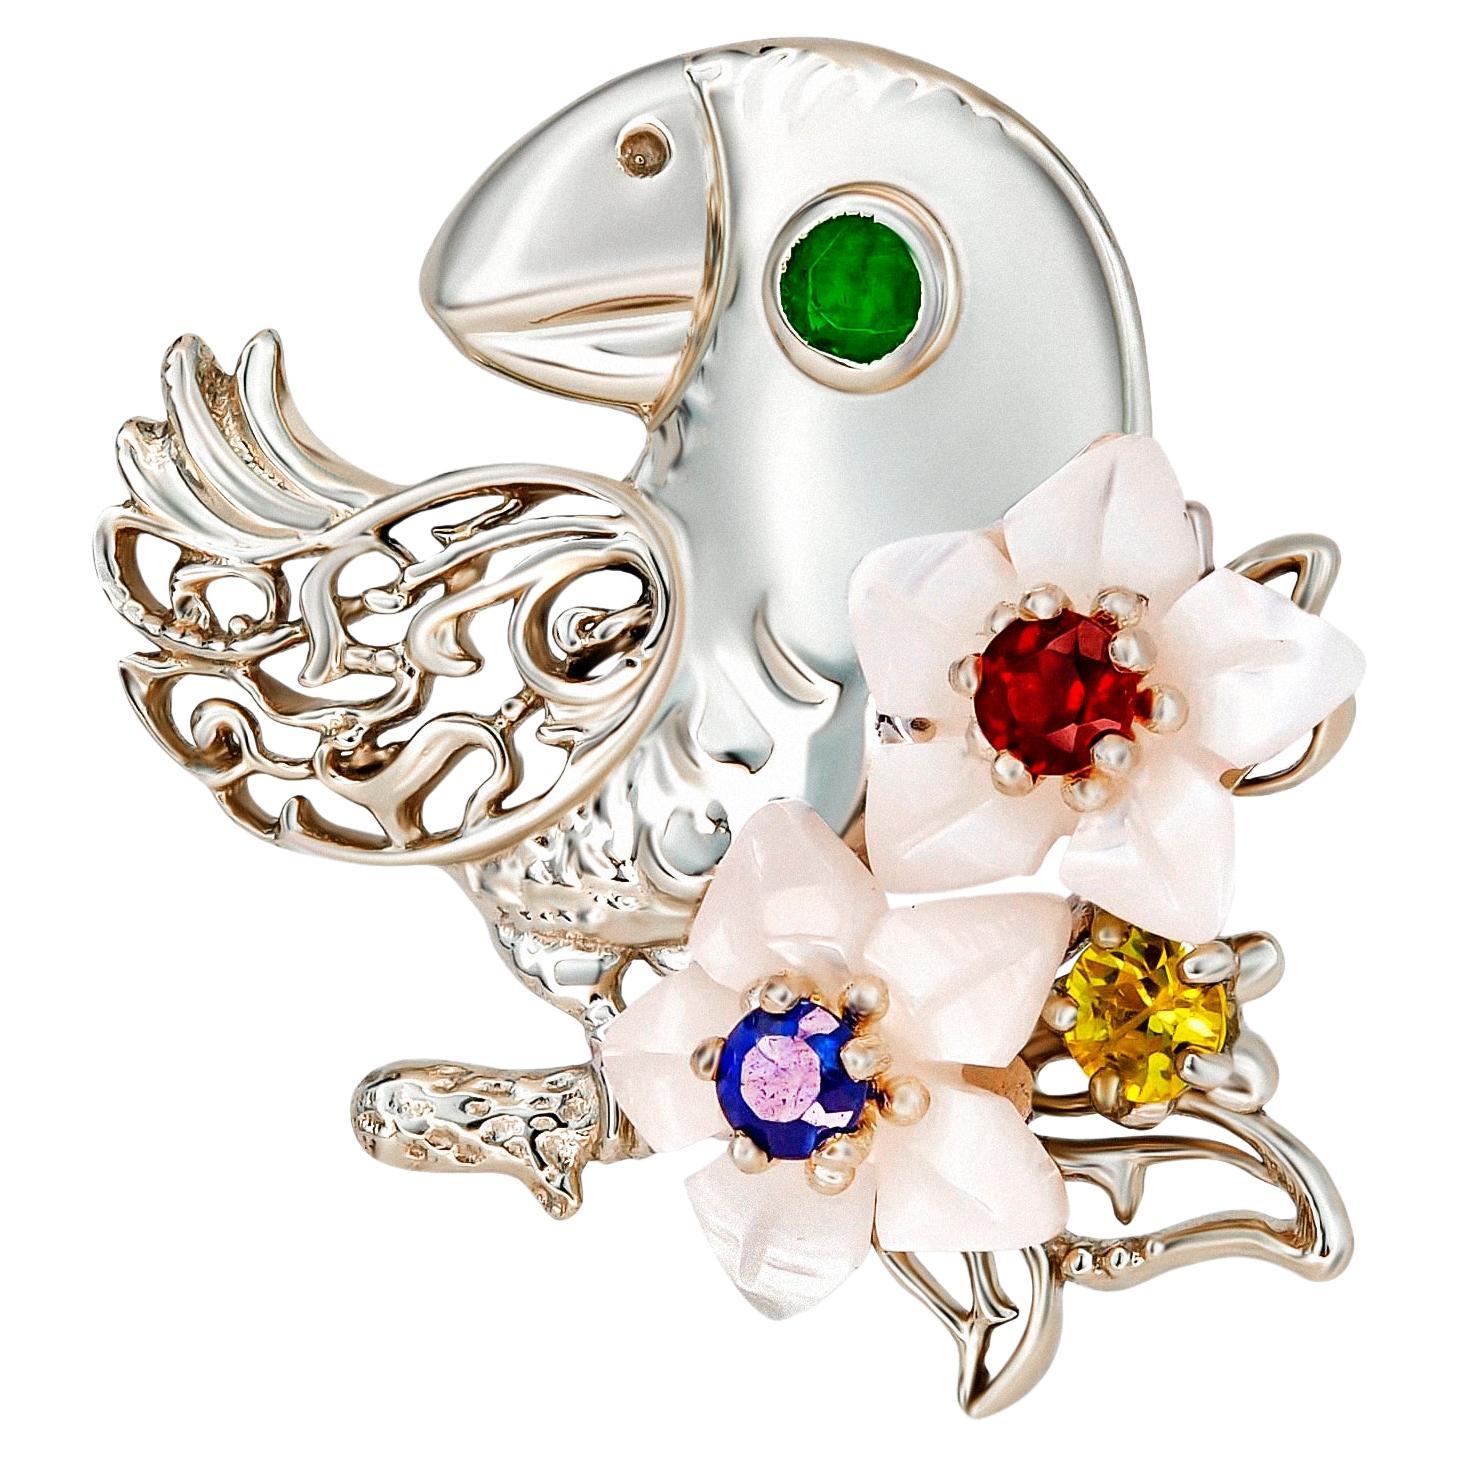 Parrot on flower pendant with colored gems.  For Sale